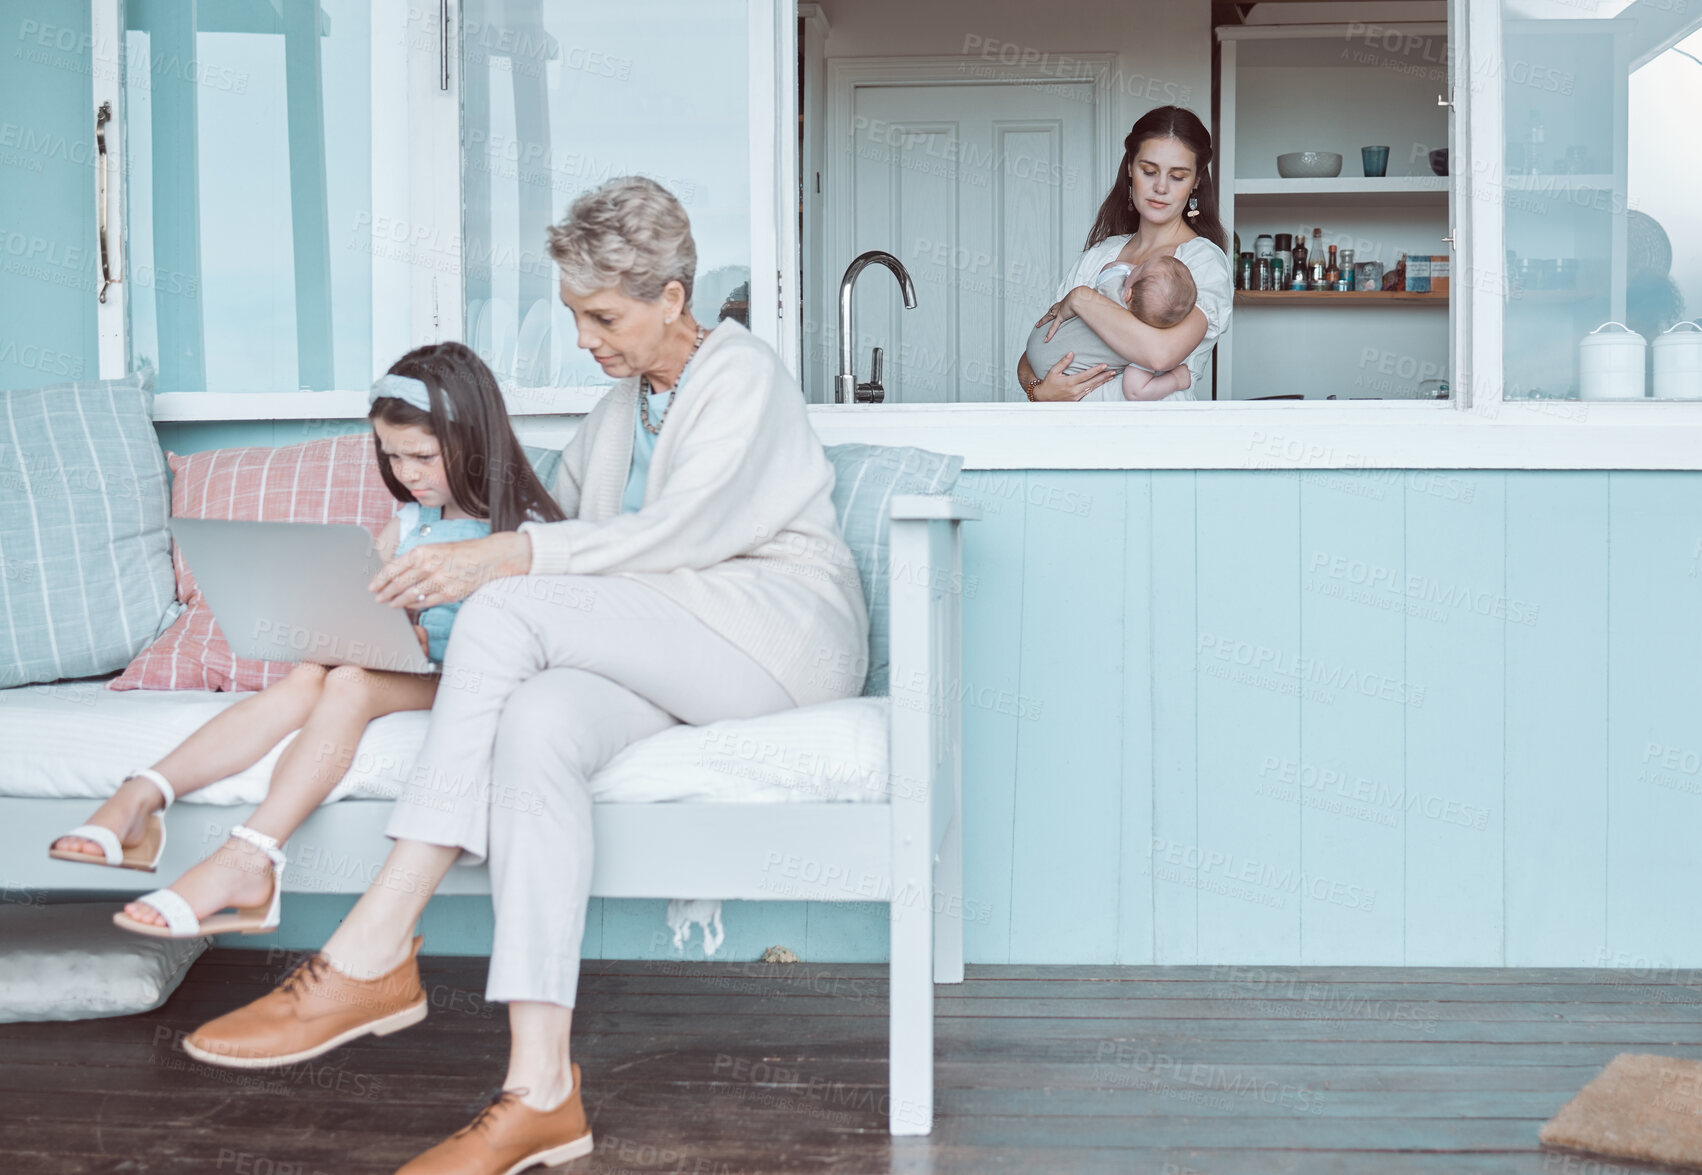 Buy stock photo Shot of a mature woman bonding with her granddaughter while a mother holds her newborn in the background